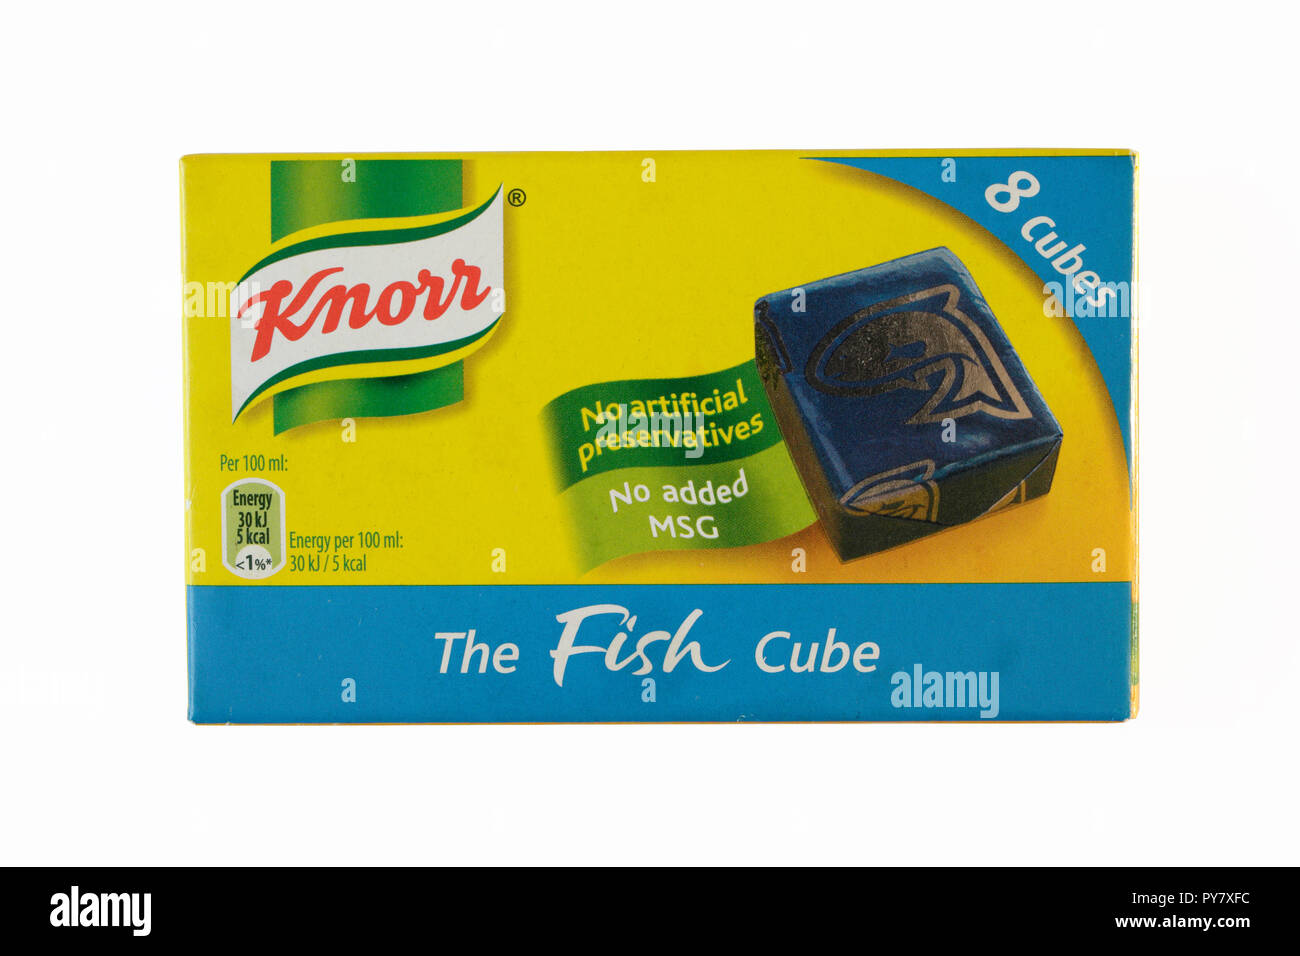 Packet of Knorr Fish stock cubes Stock Photo